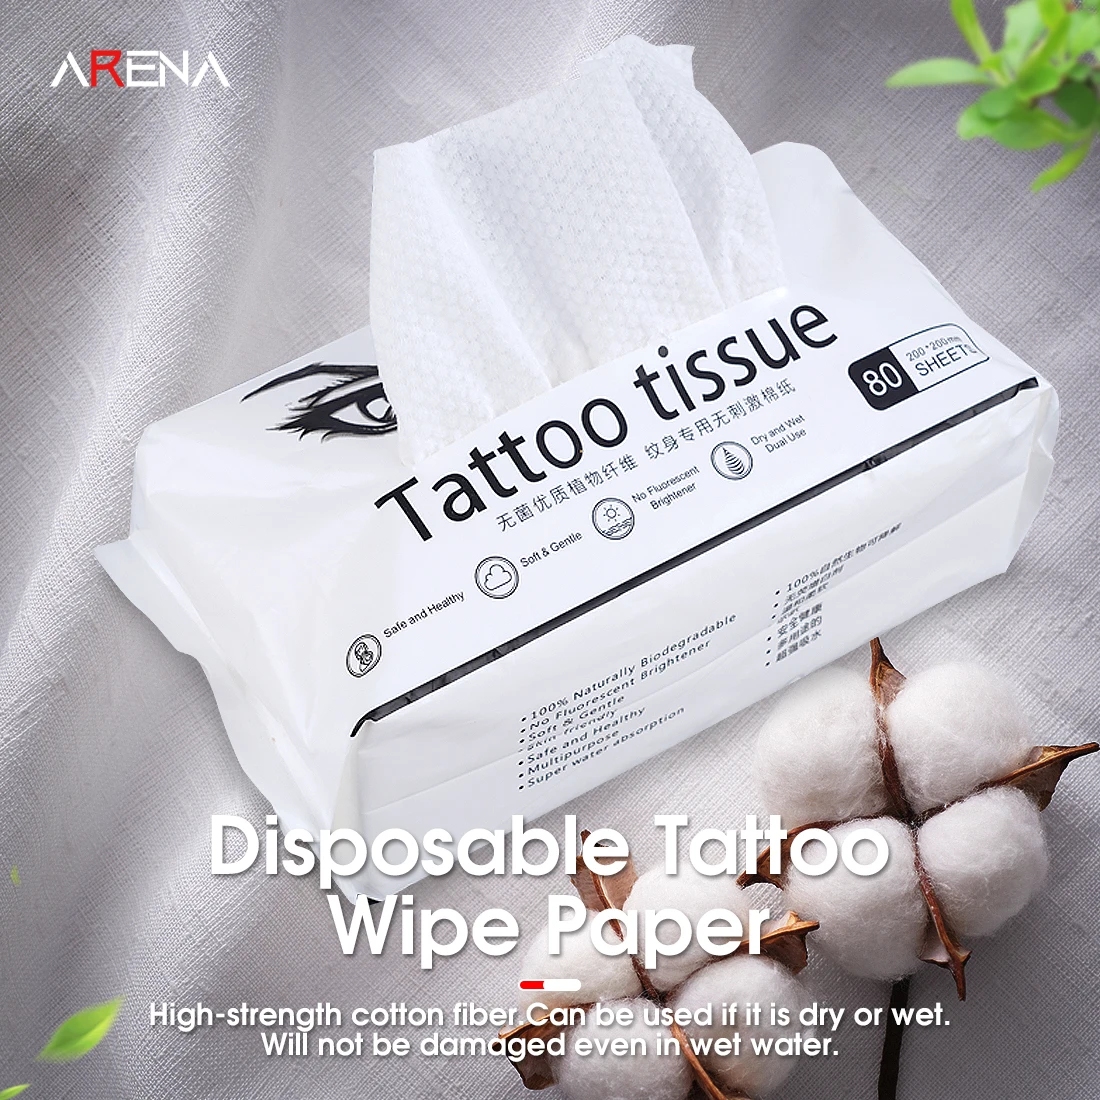 80pcs Arenahawk White Disposable Tattoo Wipe Paper Soft Tissue Skin Cloth Towel Body Art Cleaning Makeup Tattoo Supplies